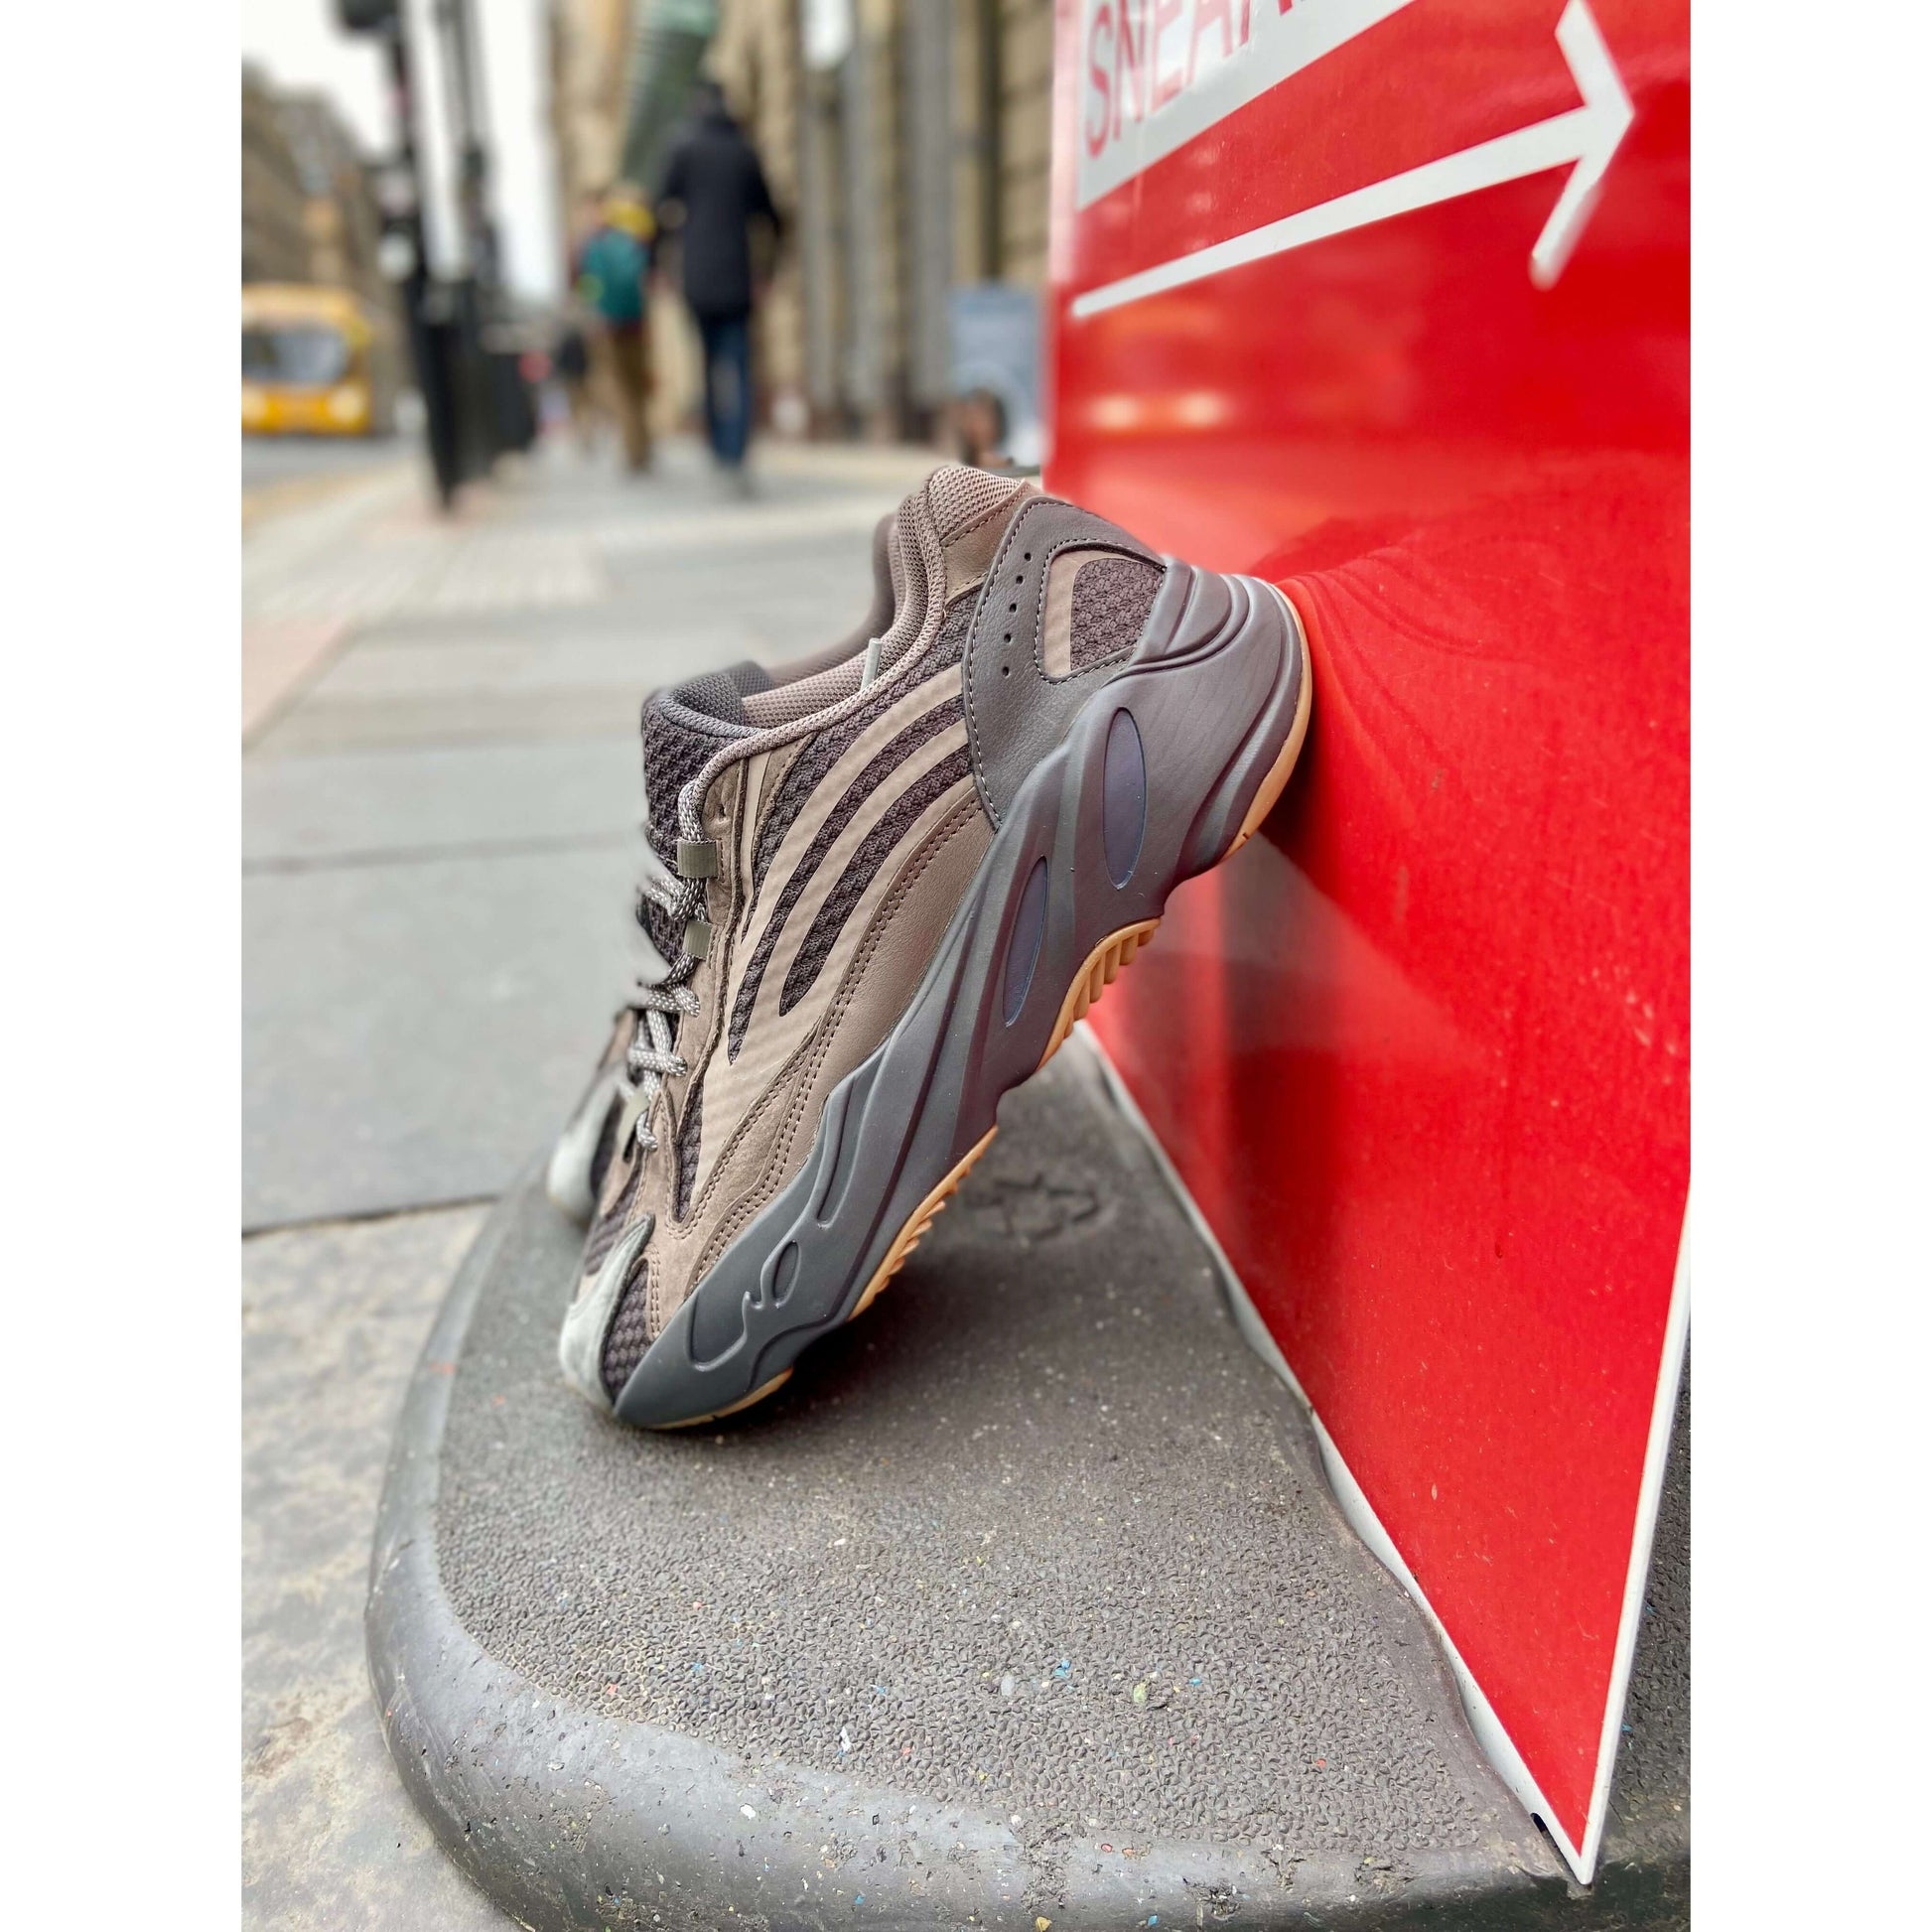 Adidas Yeezy Boost 700 V2 Geode by Yeezy from £335.00